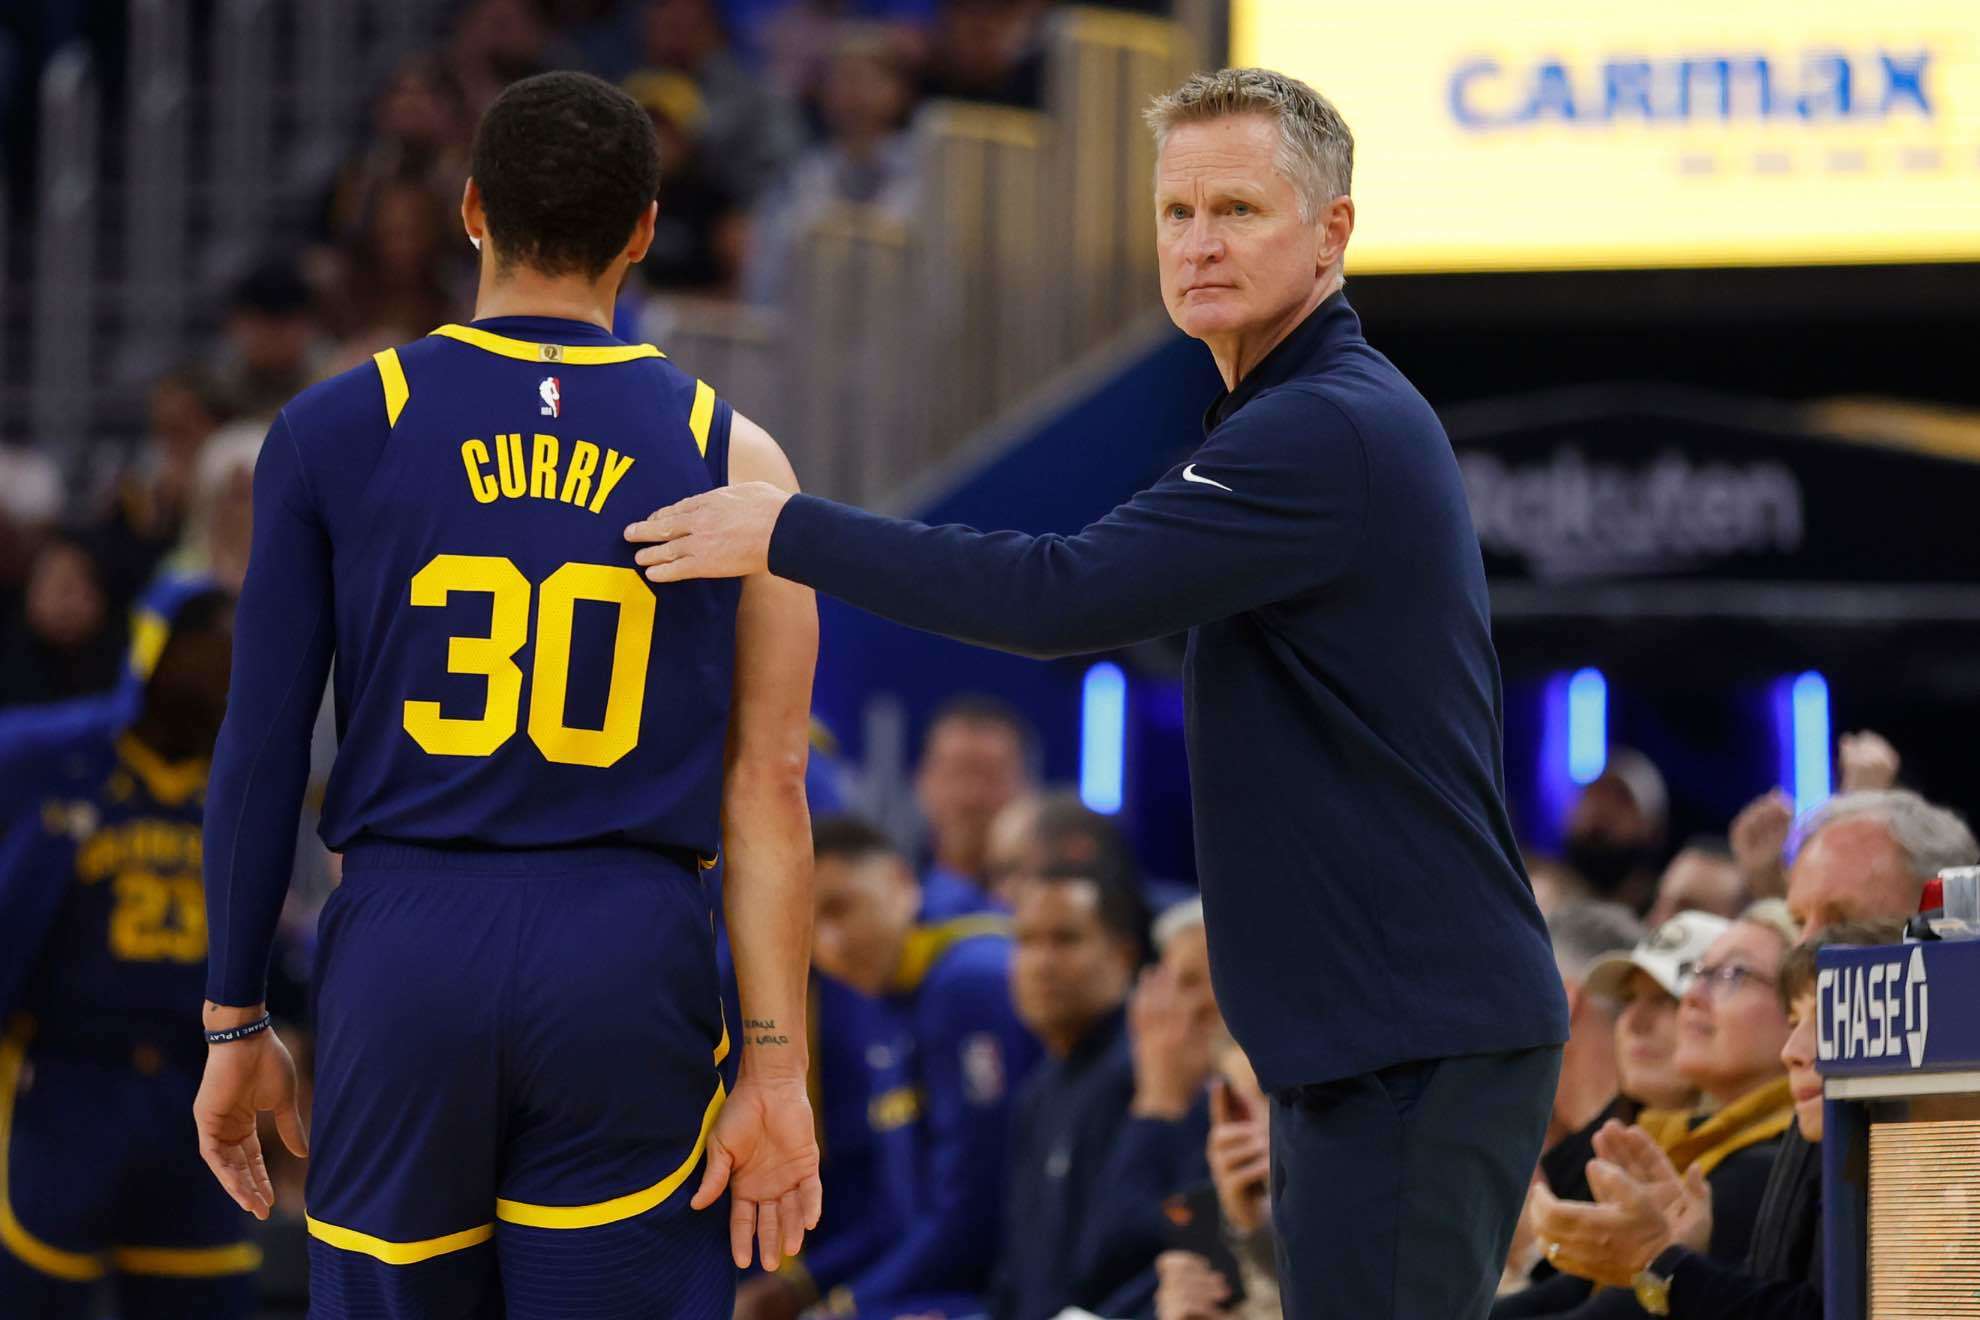 Stephen Curry spent more time on the bench than he would have liked in the fourth quarter